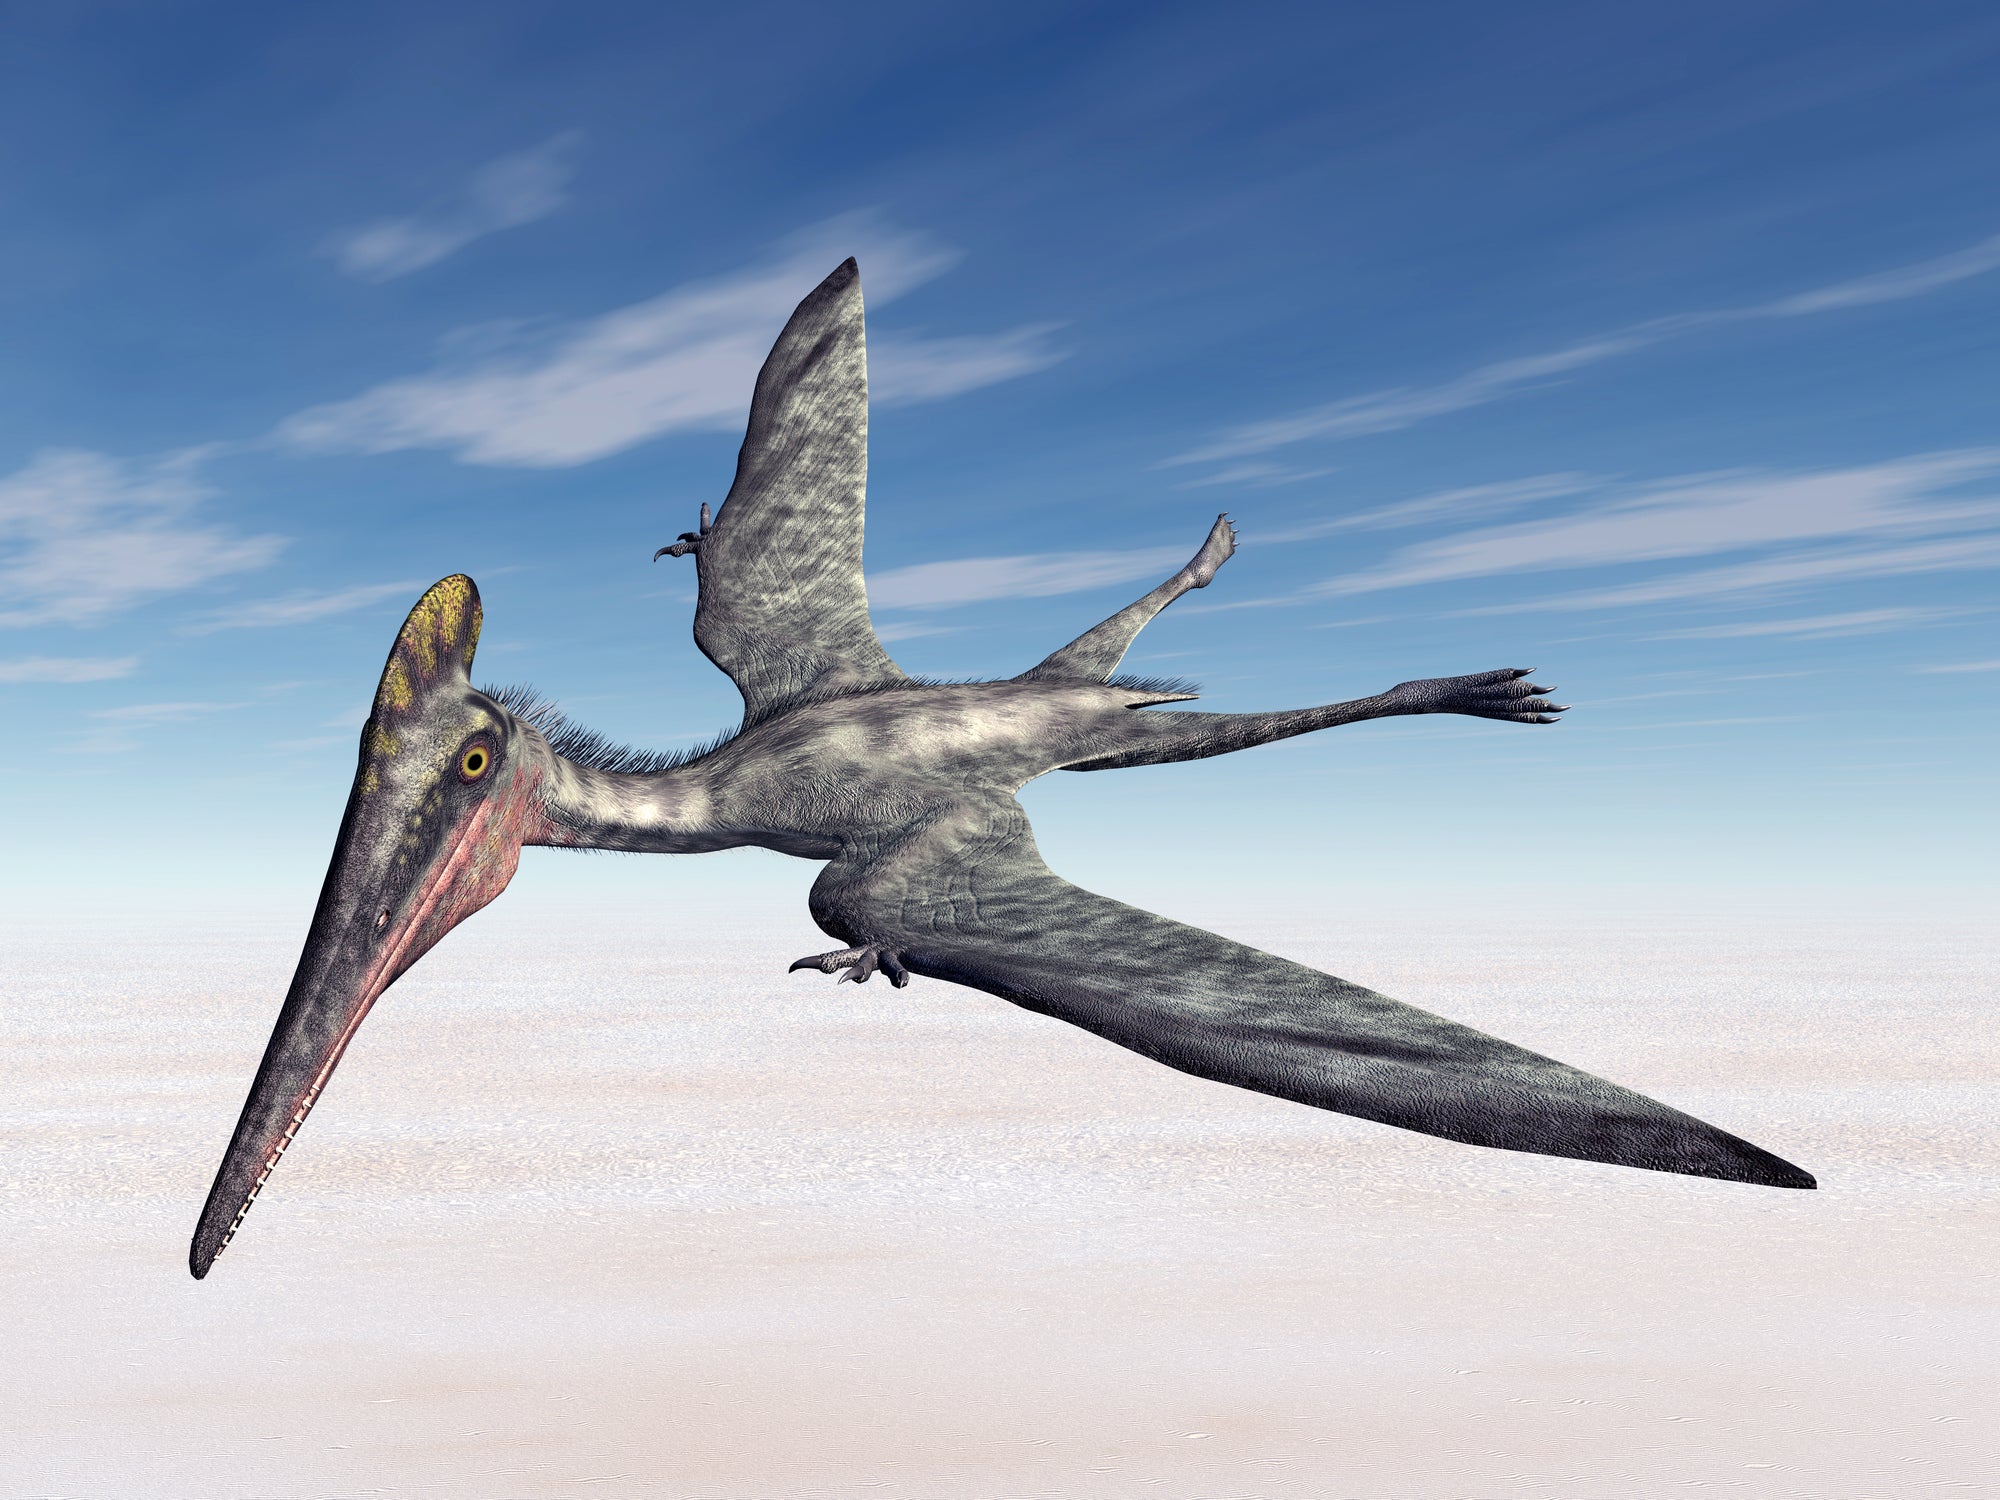 Pterosaurs first emerged as flying creatures around 245 million years ago during the Early Triassic period